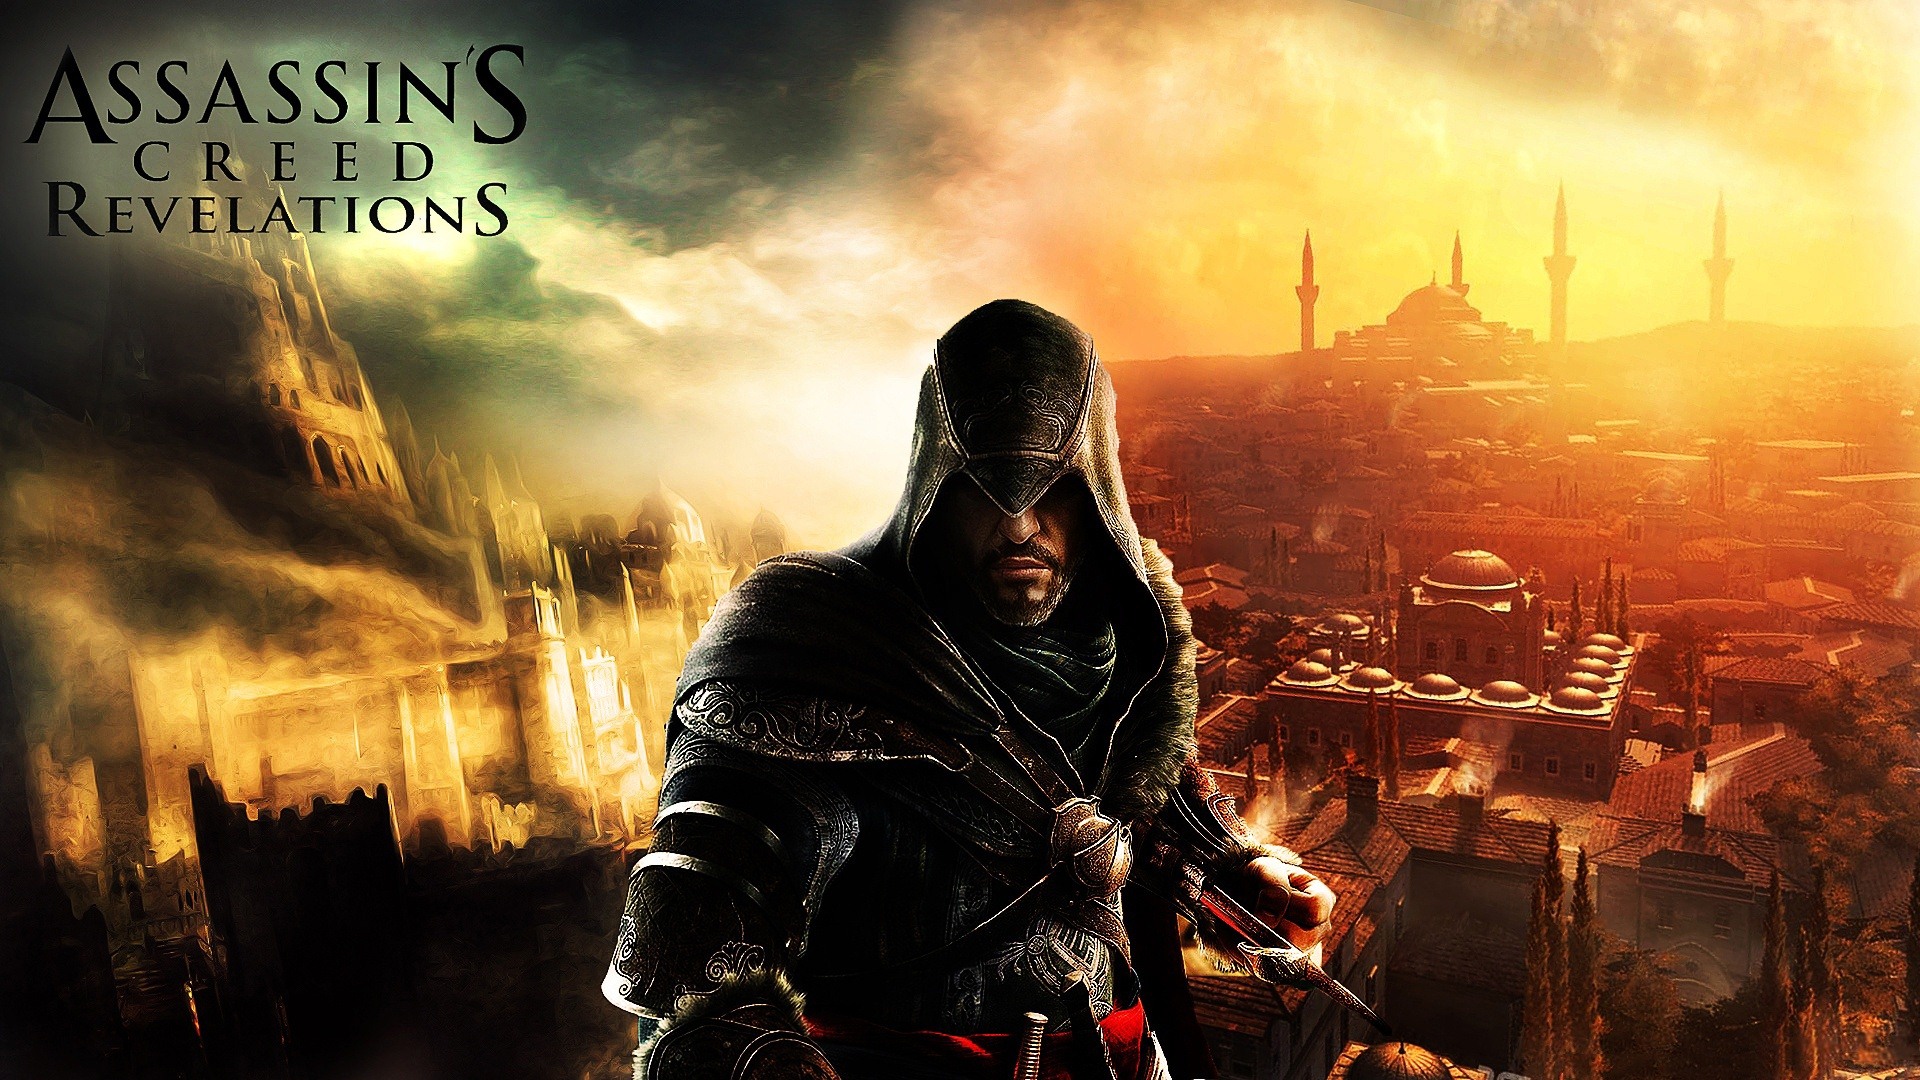 Assassin's Creed: Revelations HD wallpapers #18 - 1920x1080